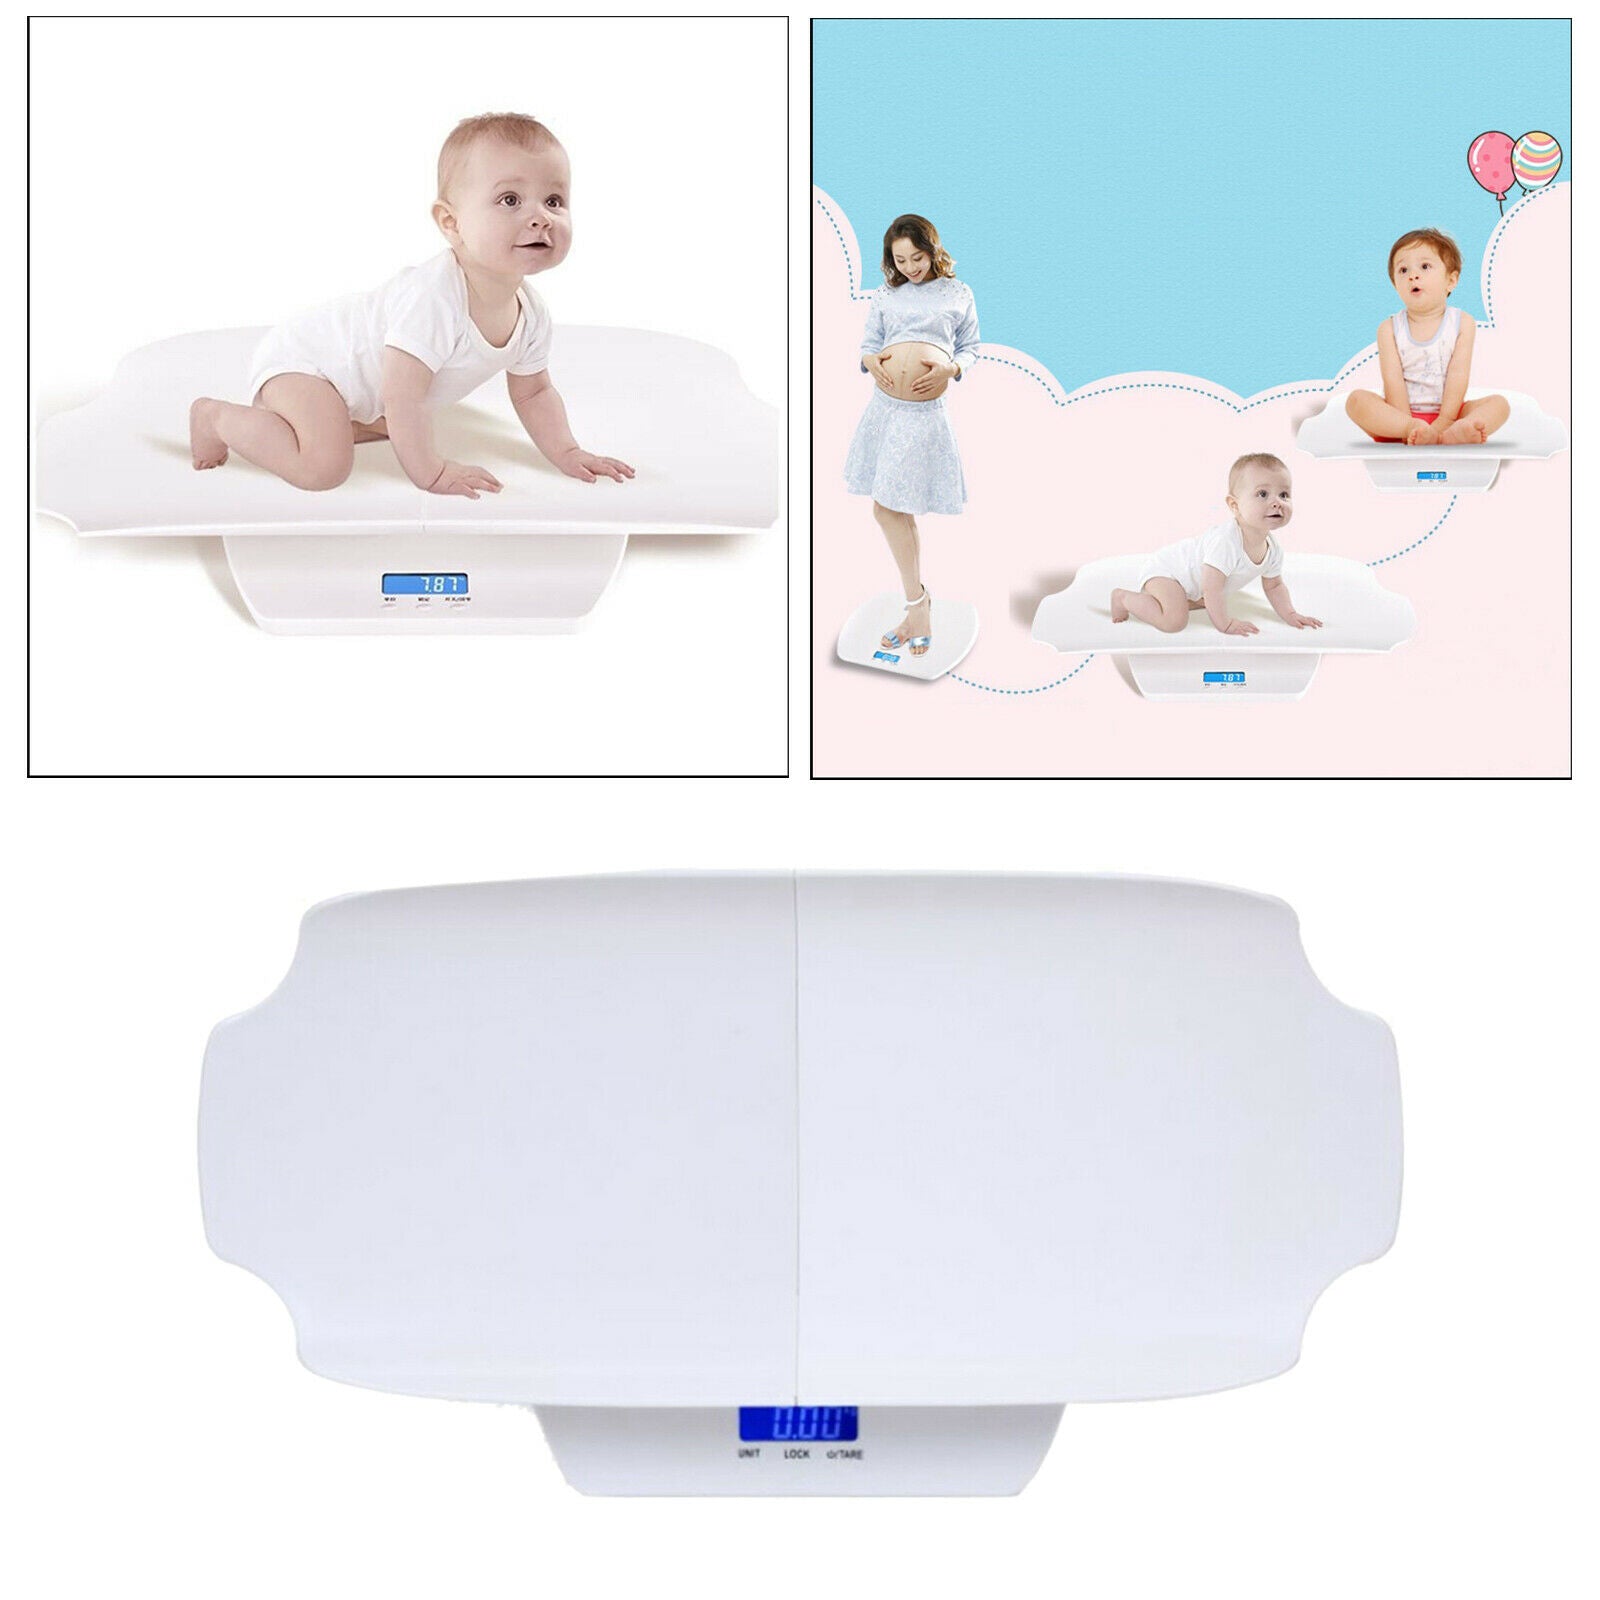 100kg/10g Electronic Baby Weighing Scale Infant Pet Toddler Digital Scales